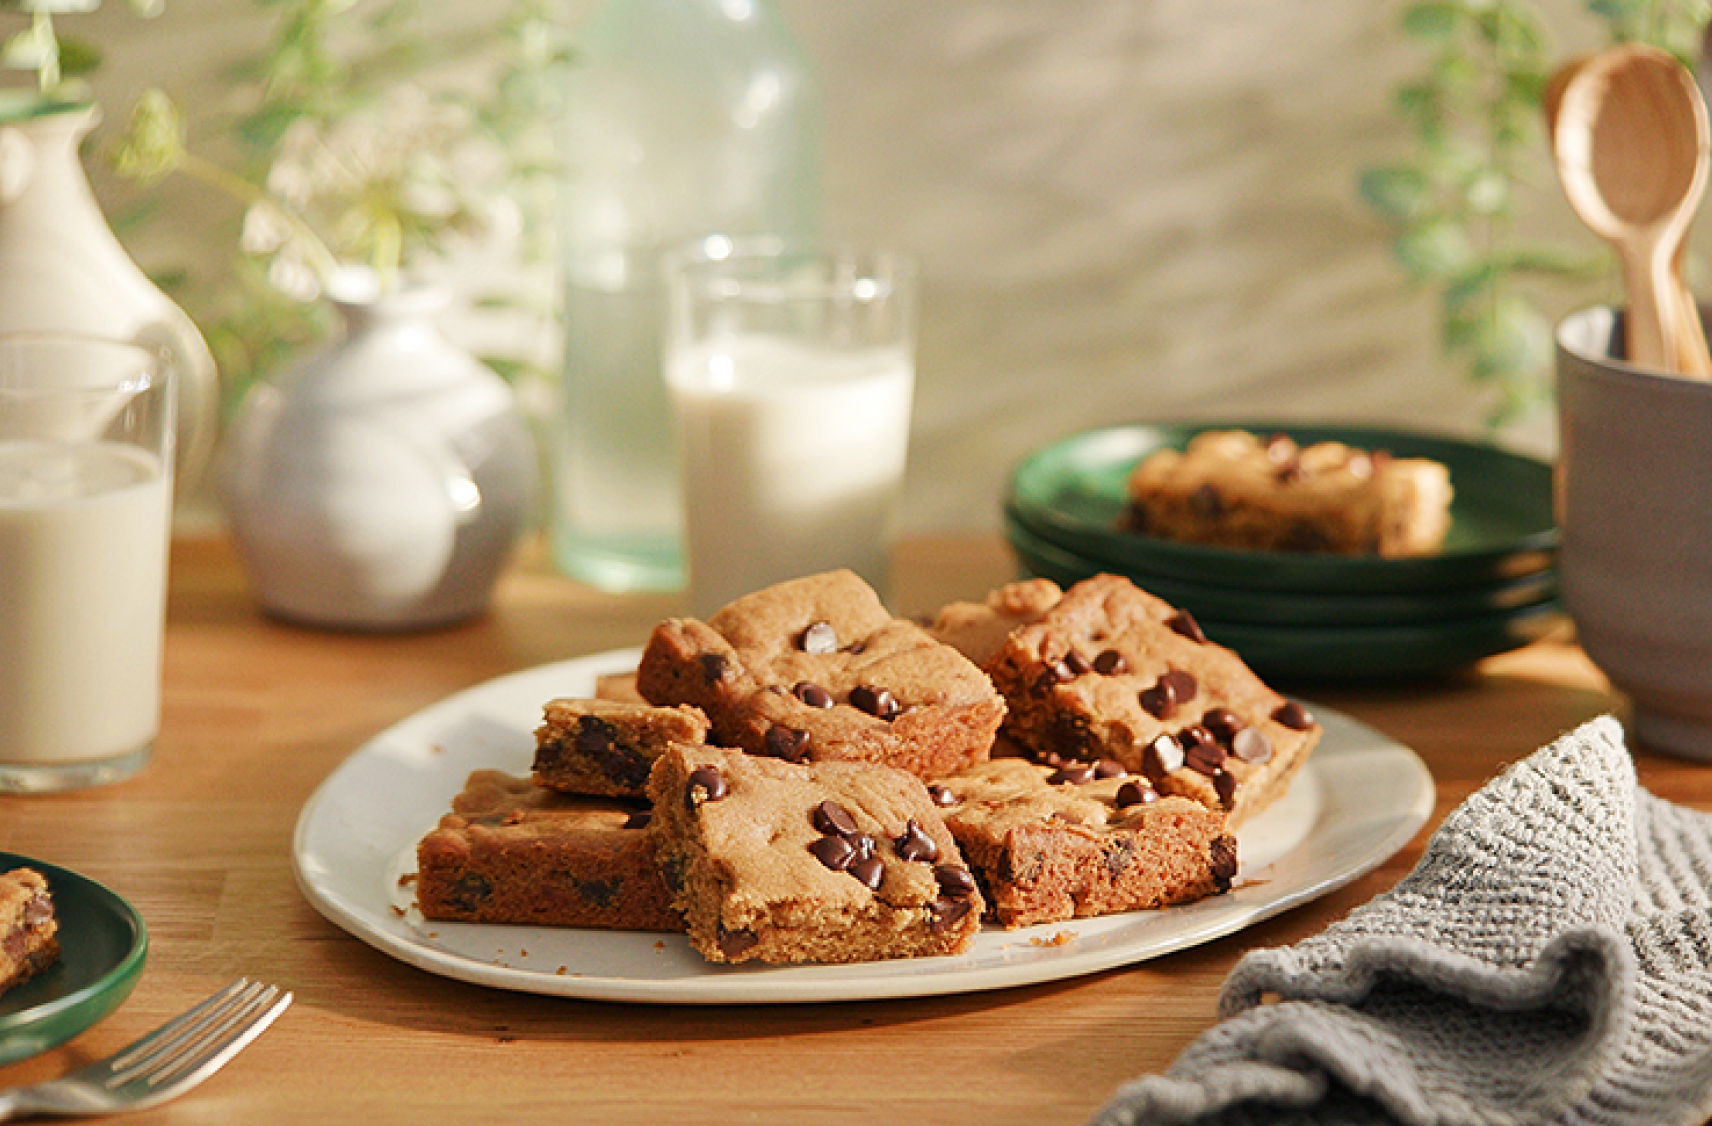 A plate filled with plant based vegan chocolate chip blondies on a kitchen table with glasses of milk beverages and utensils